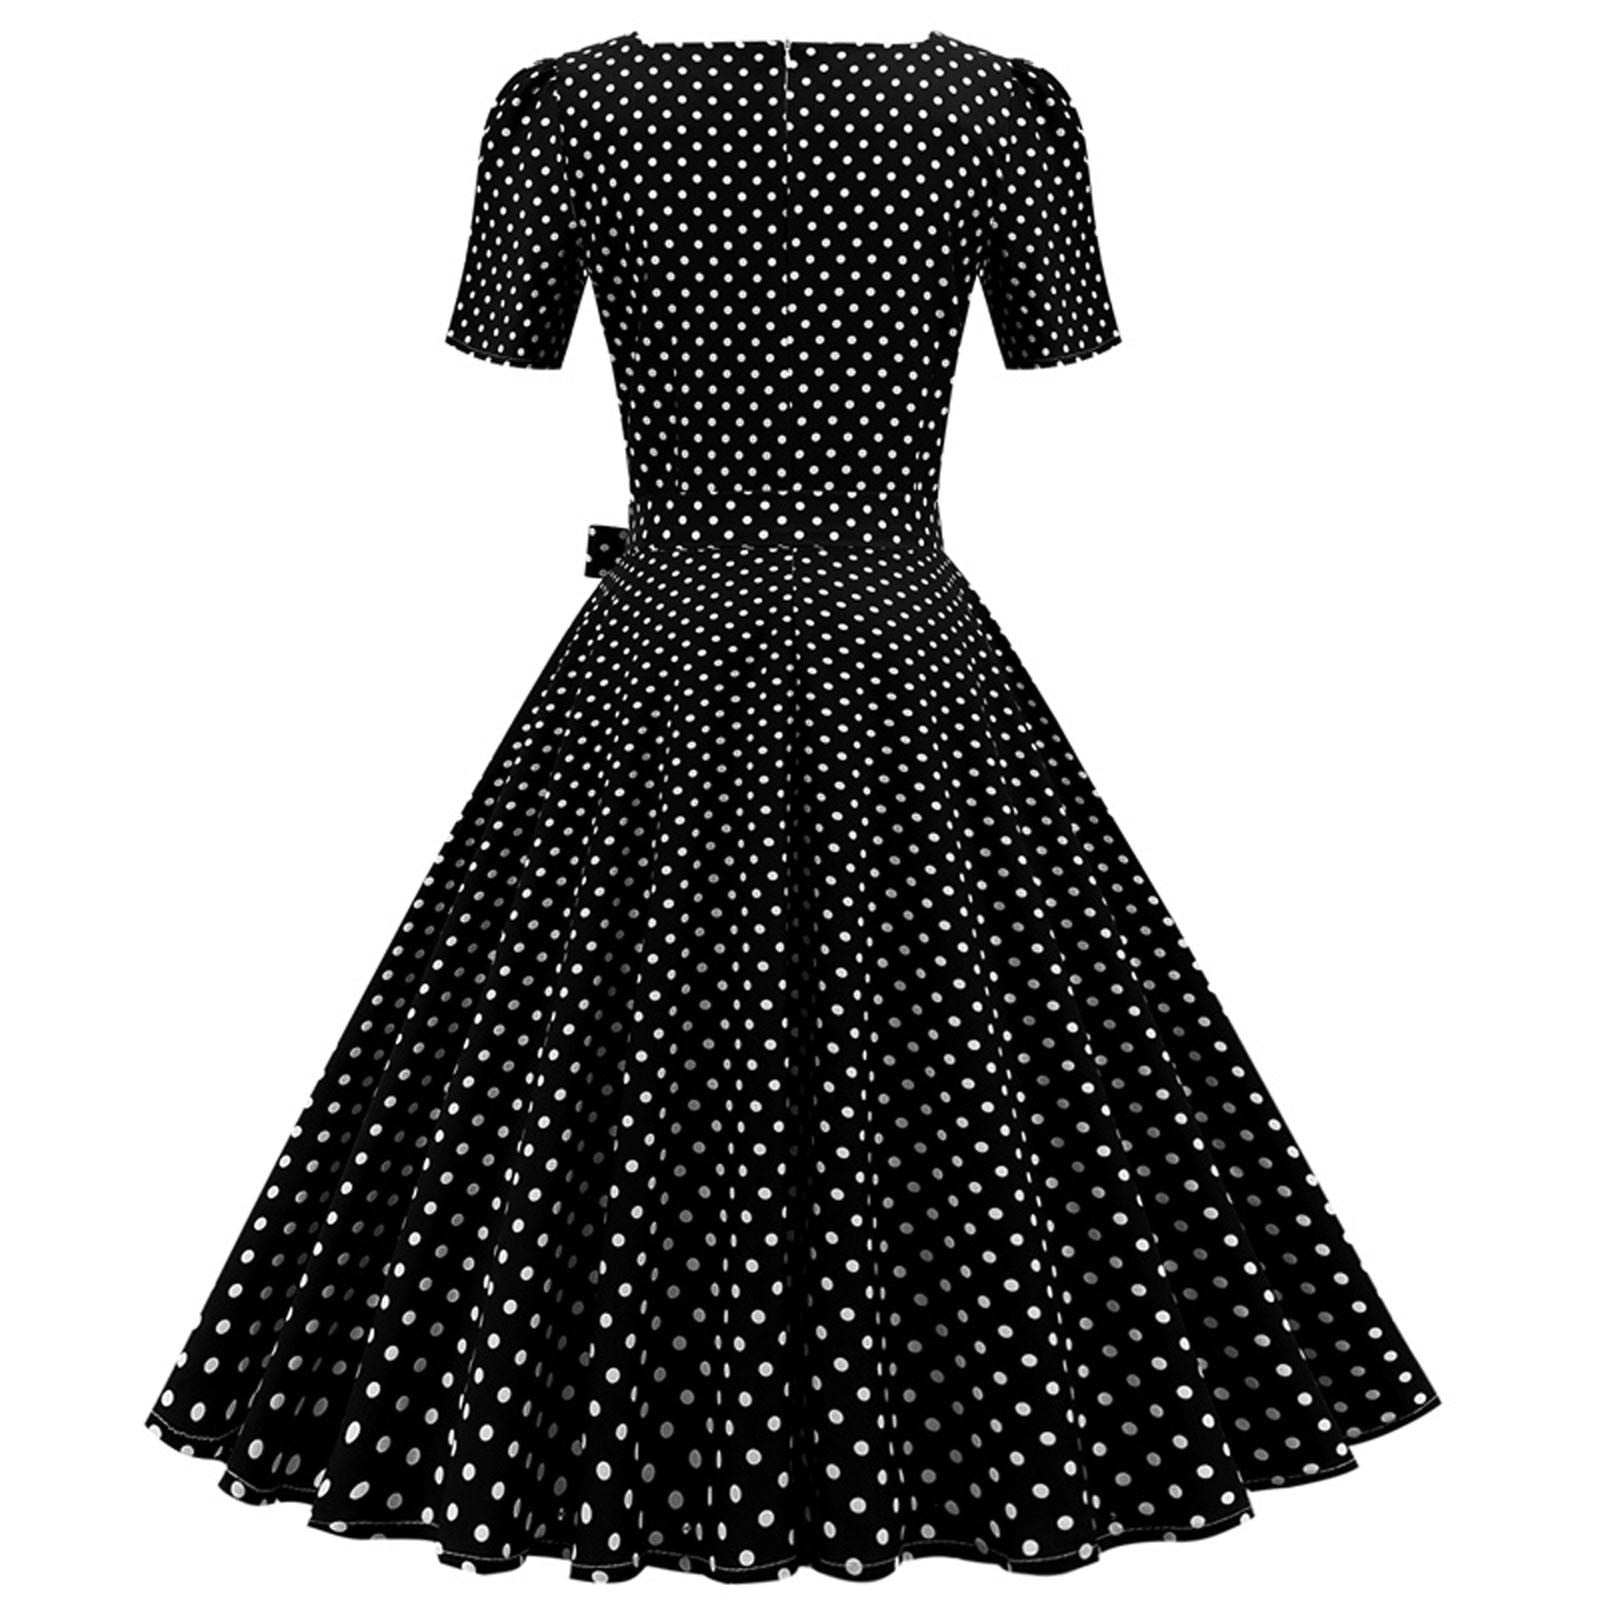 Vintage 1950s Housewife Evening Party Prom Dresses for Women Short Sleeve/Sleeveless Christmas Party Cocktail Dress 